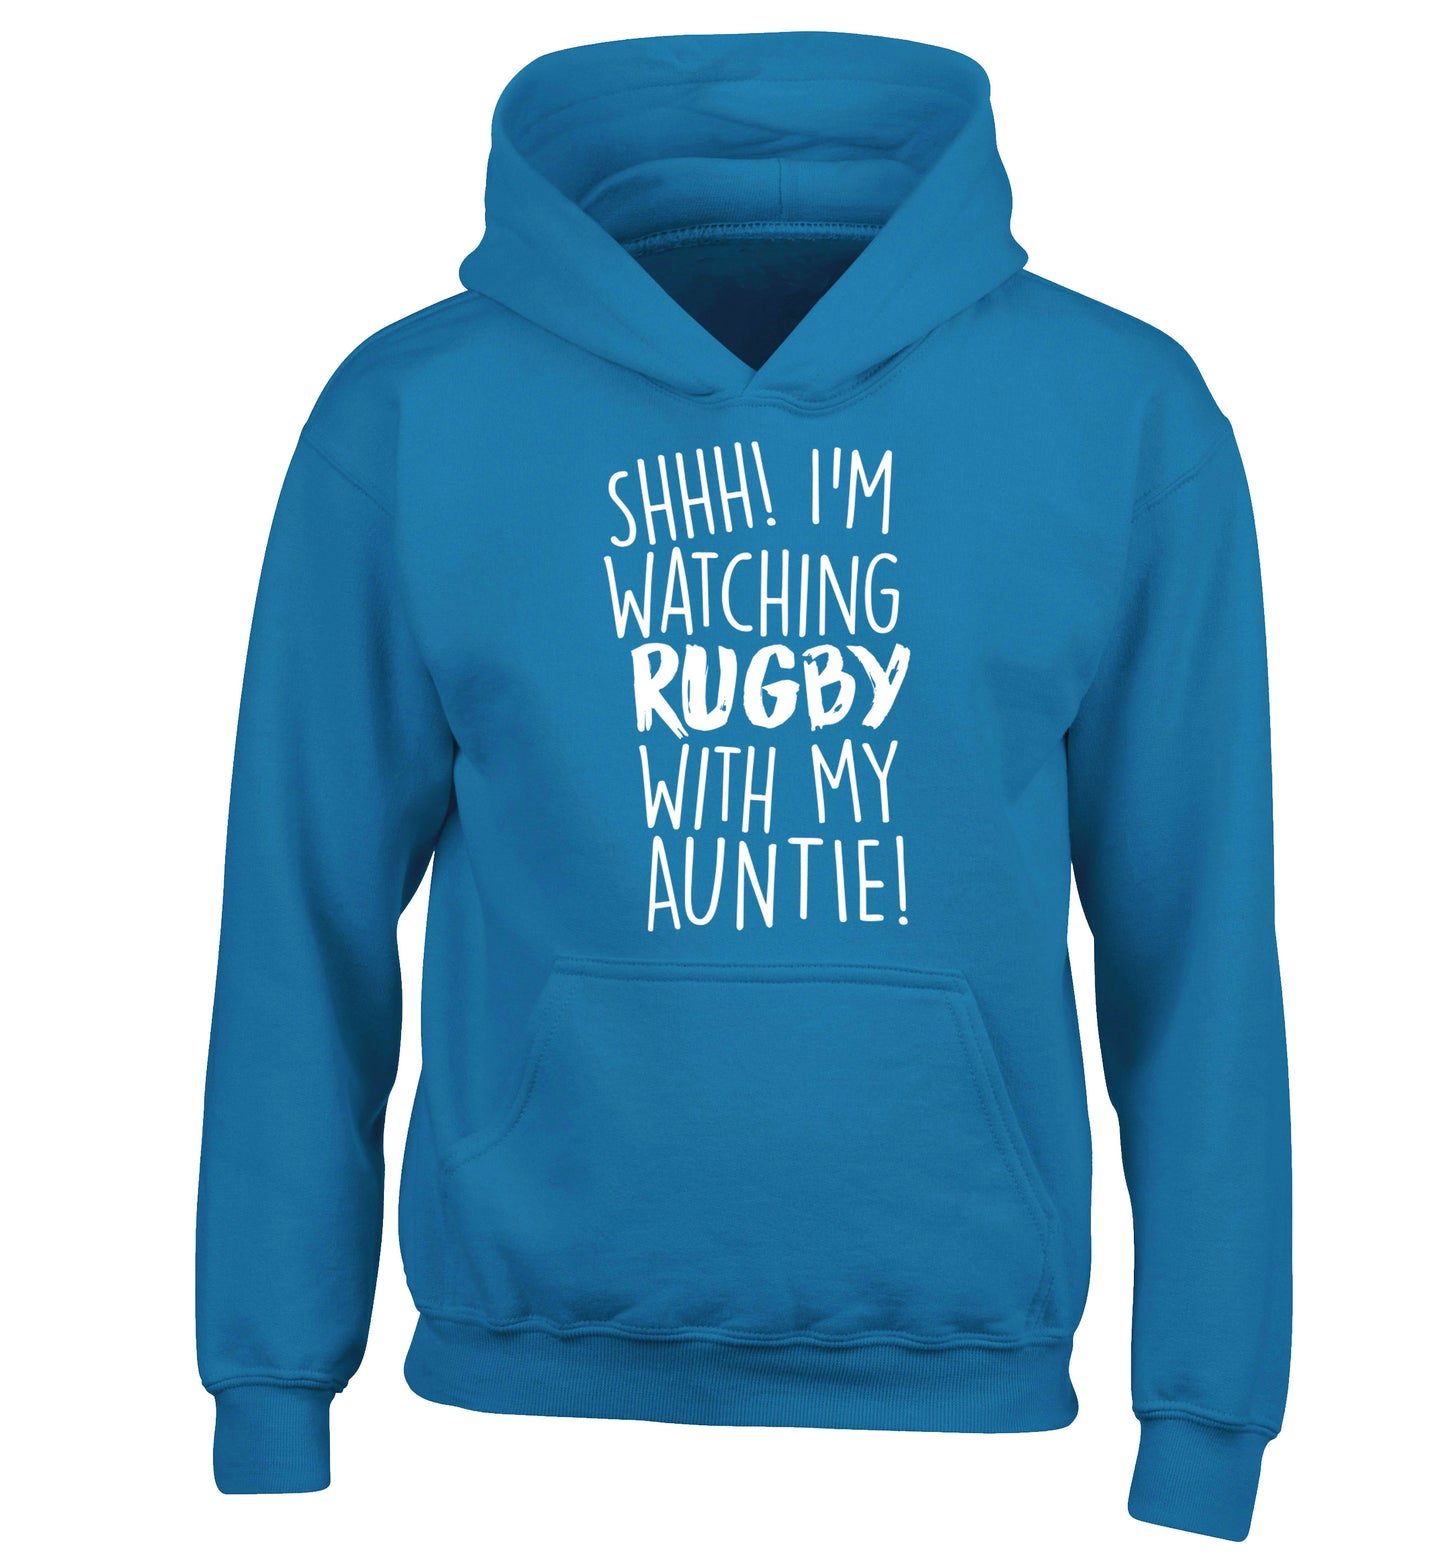 Shhh I'm watchin rugby with my auntie children's blue hoodie 12-13 Years